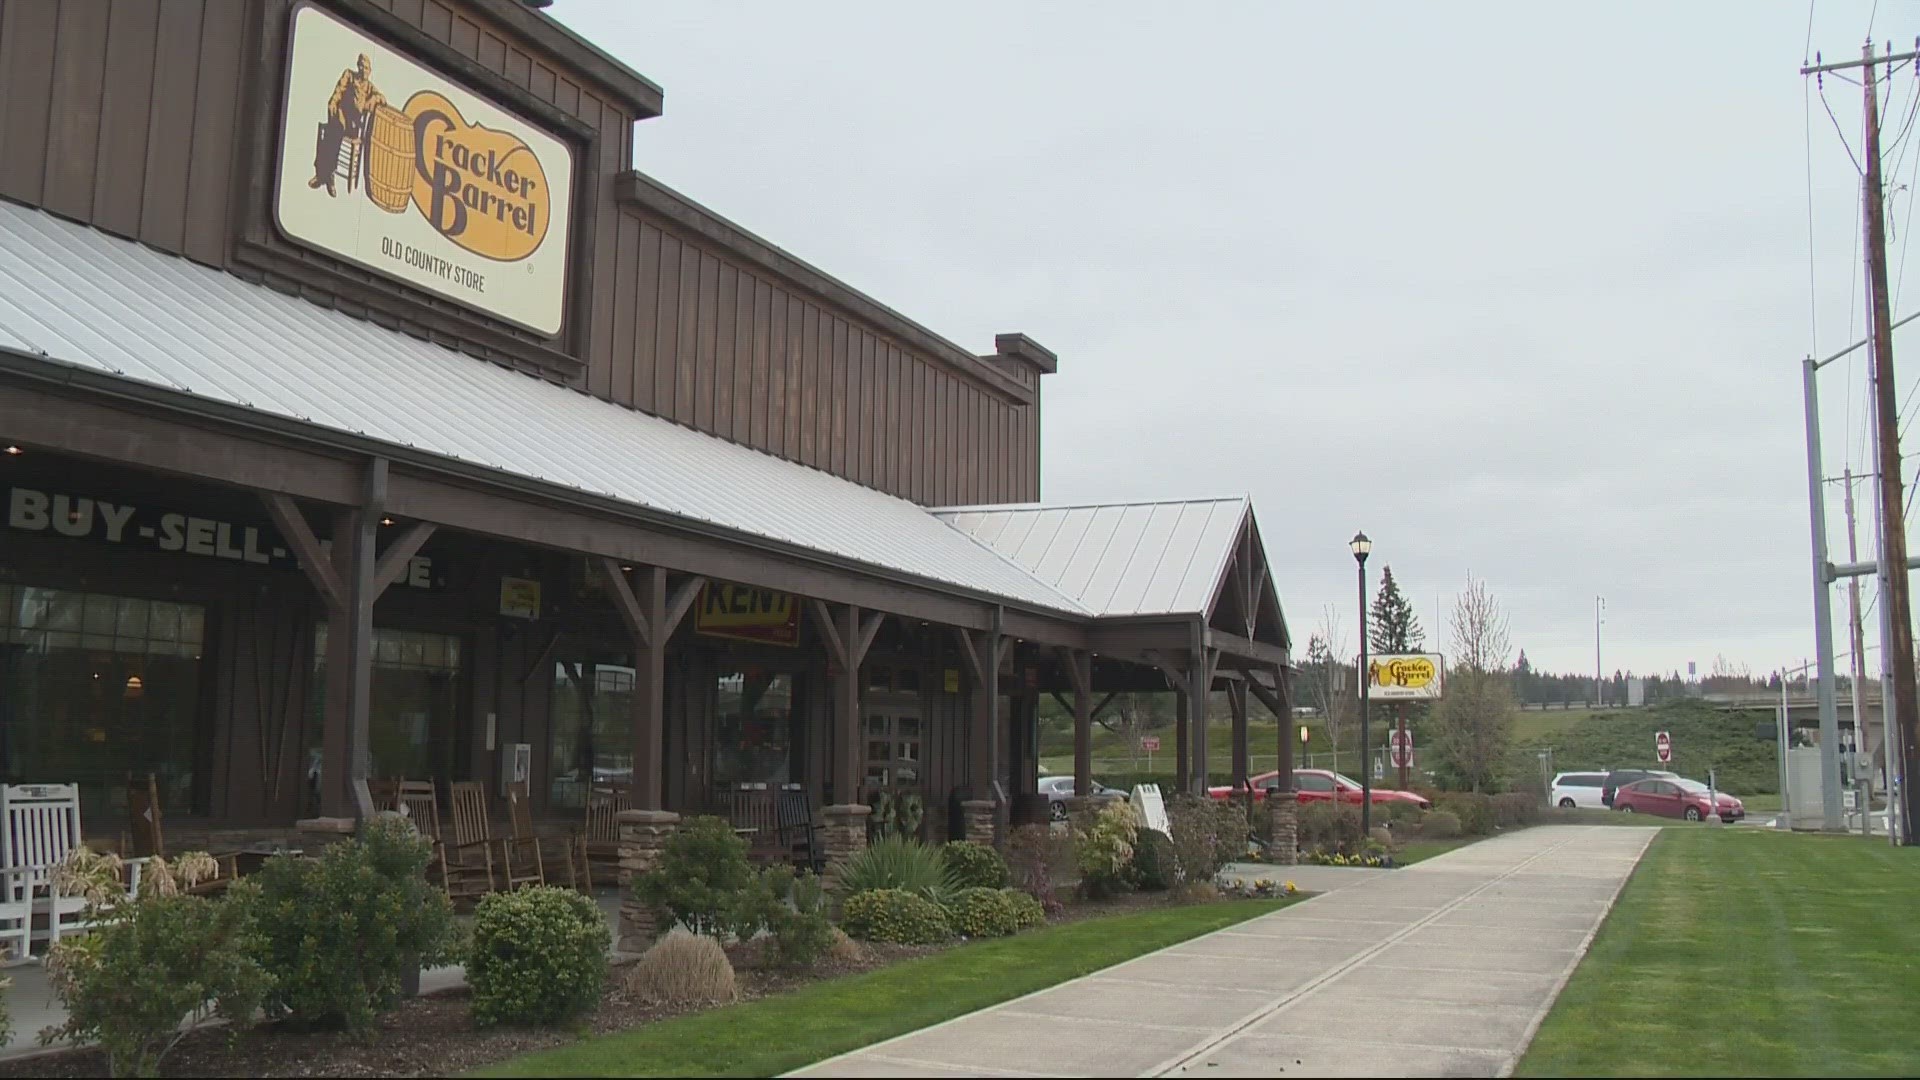 The only Cracker Barrel still open in Oregon is in Medford. Cracker Barrel cited the pandemic's impact on the business as its reason for the closures.